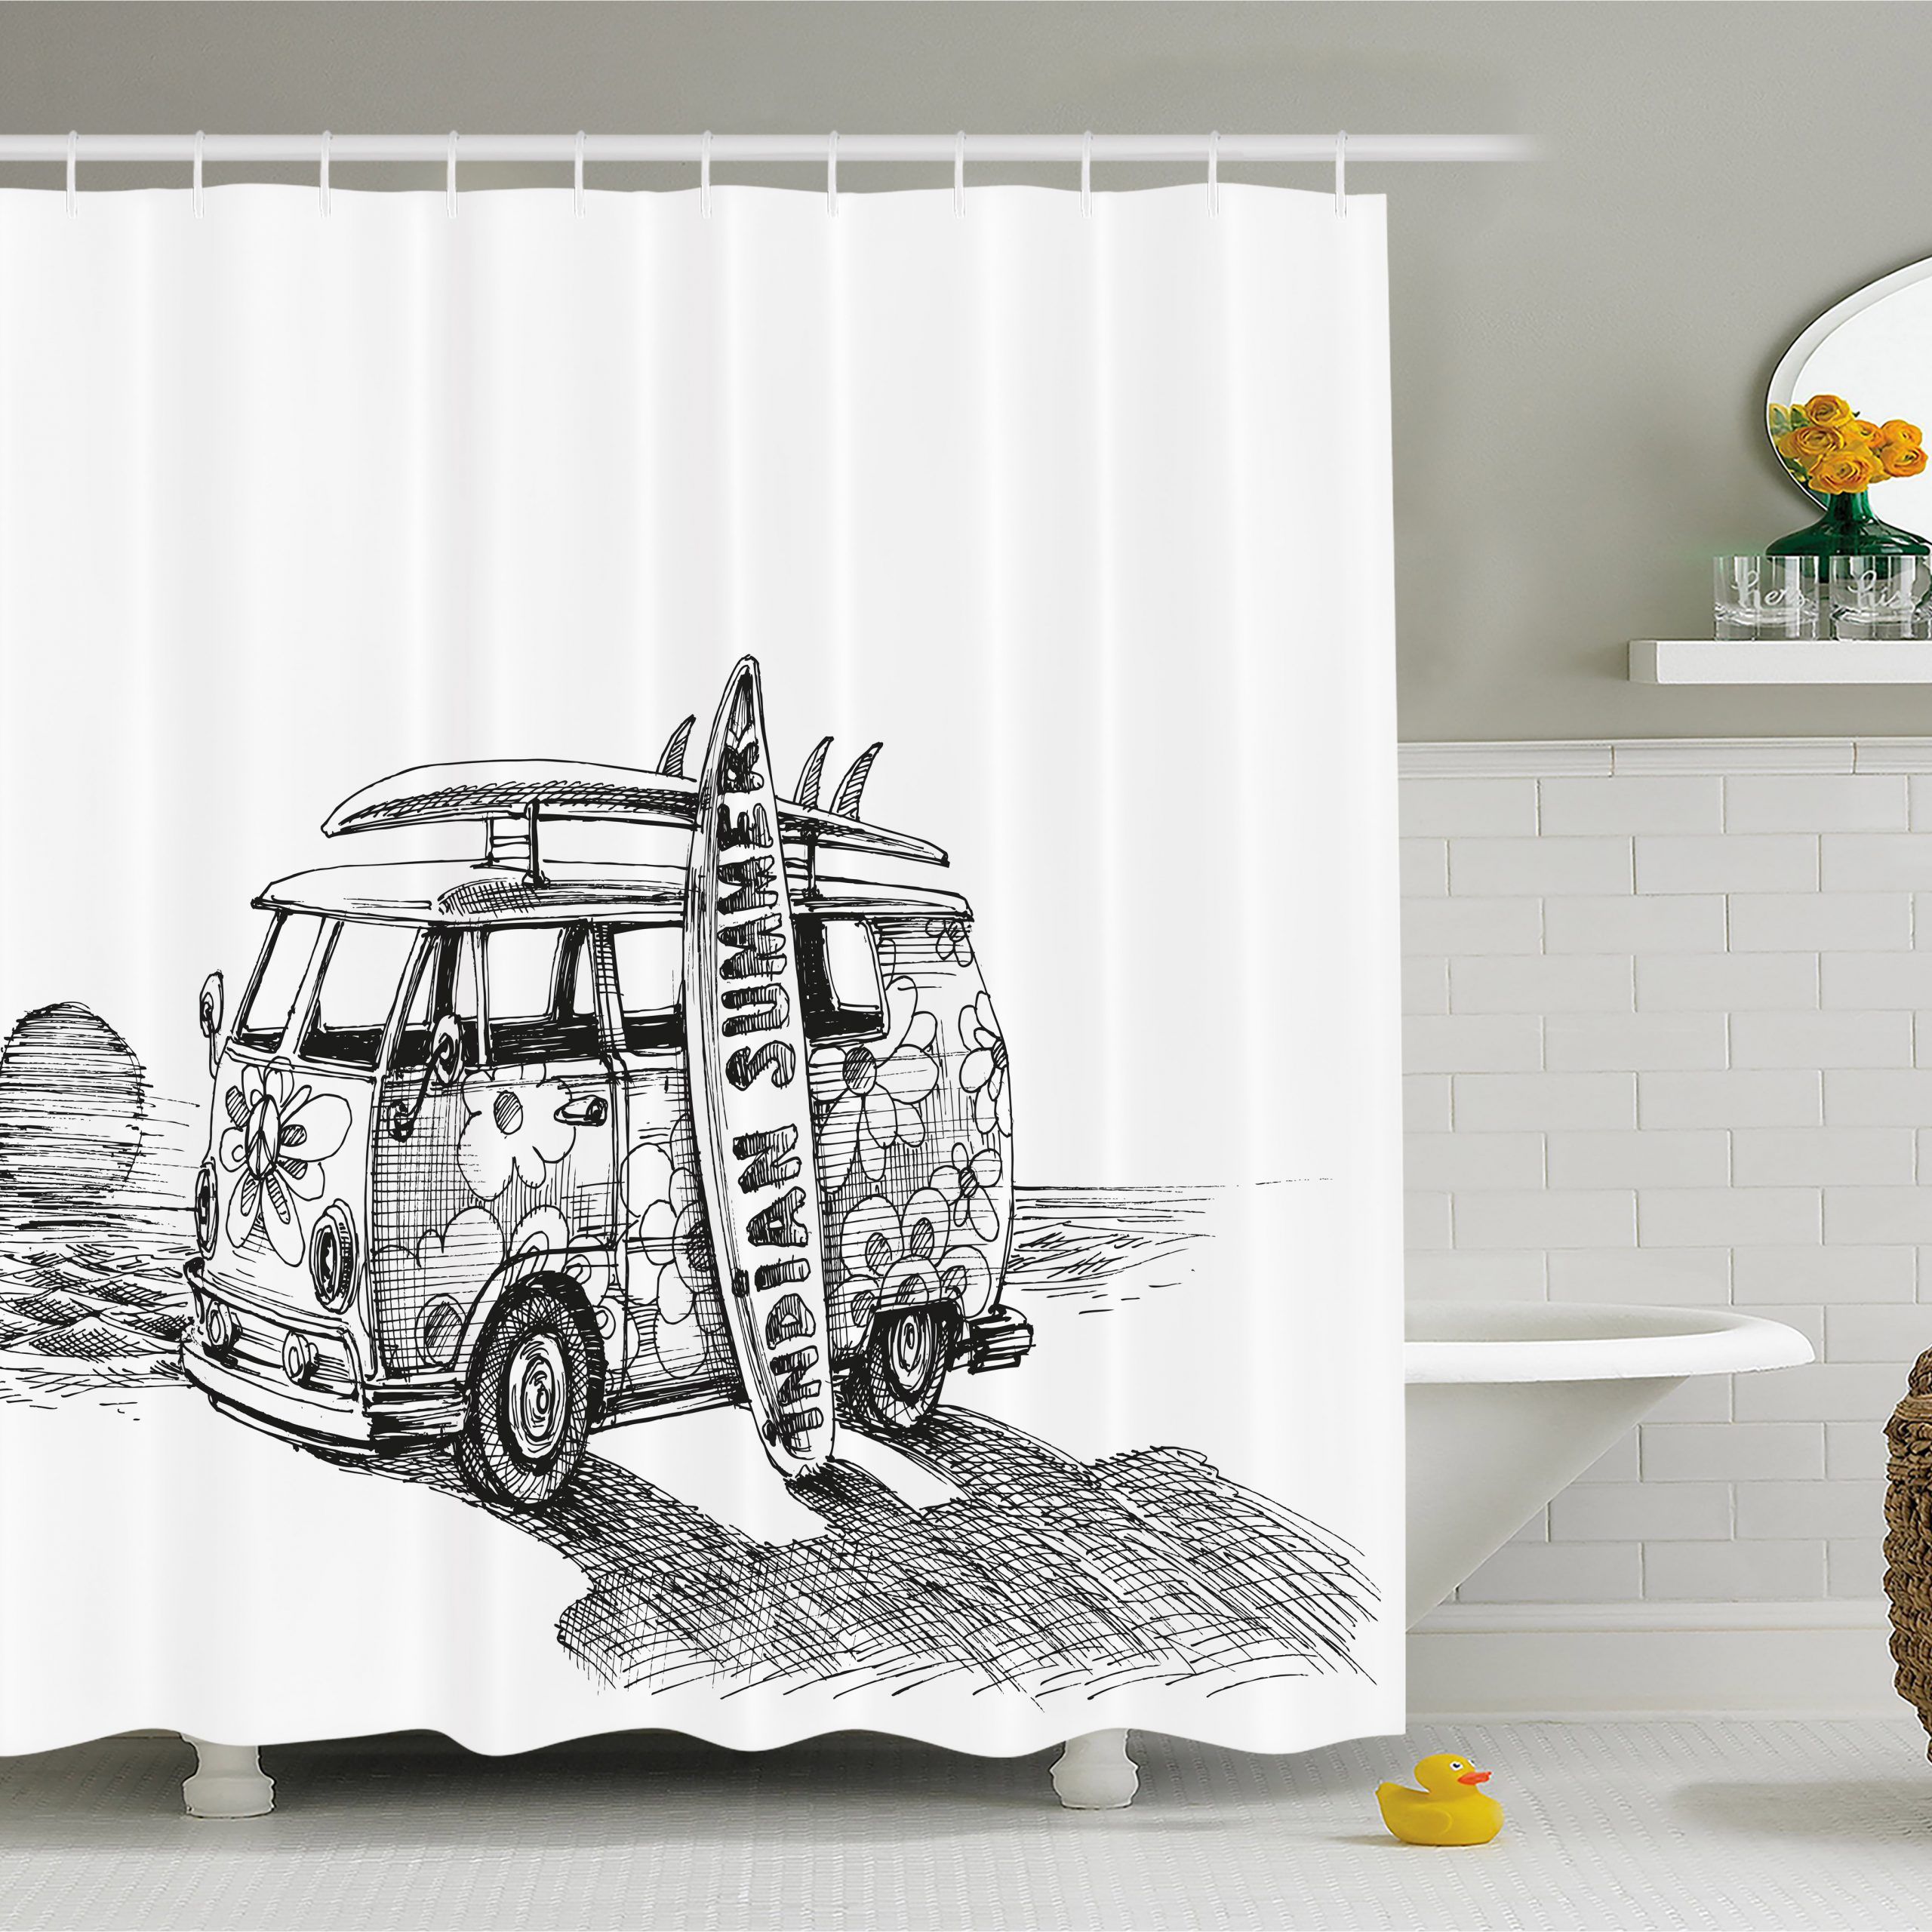 Sketchy Shower Curtain, Hot Summer Californian Surfing Vintage Car Sea  Shore Beach Art, Fabric Bathroom Set With Hooks, Black White And Charcoal  Grey, Regarding Vintage Sea Shore All Over Printed Window Curtains (View 5 of 20)